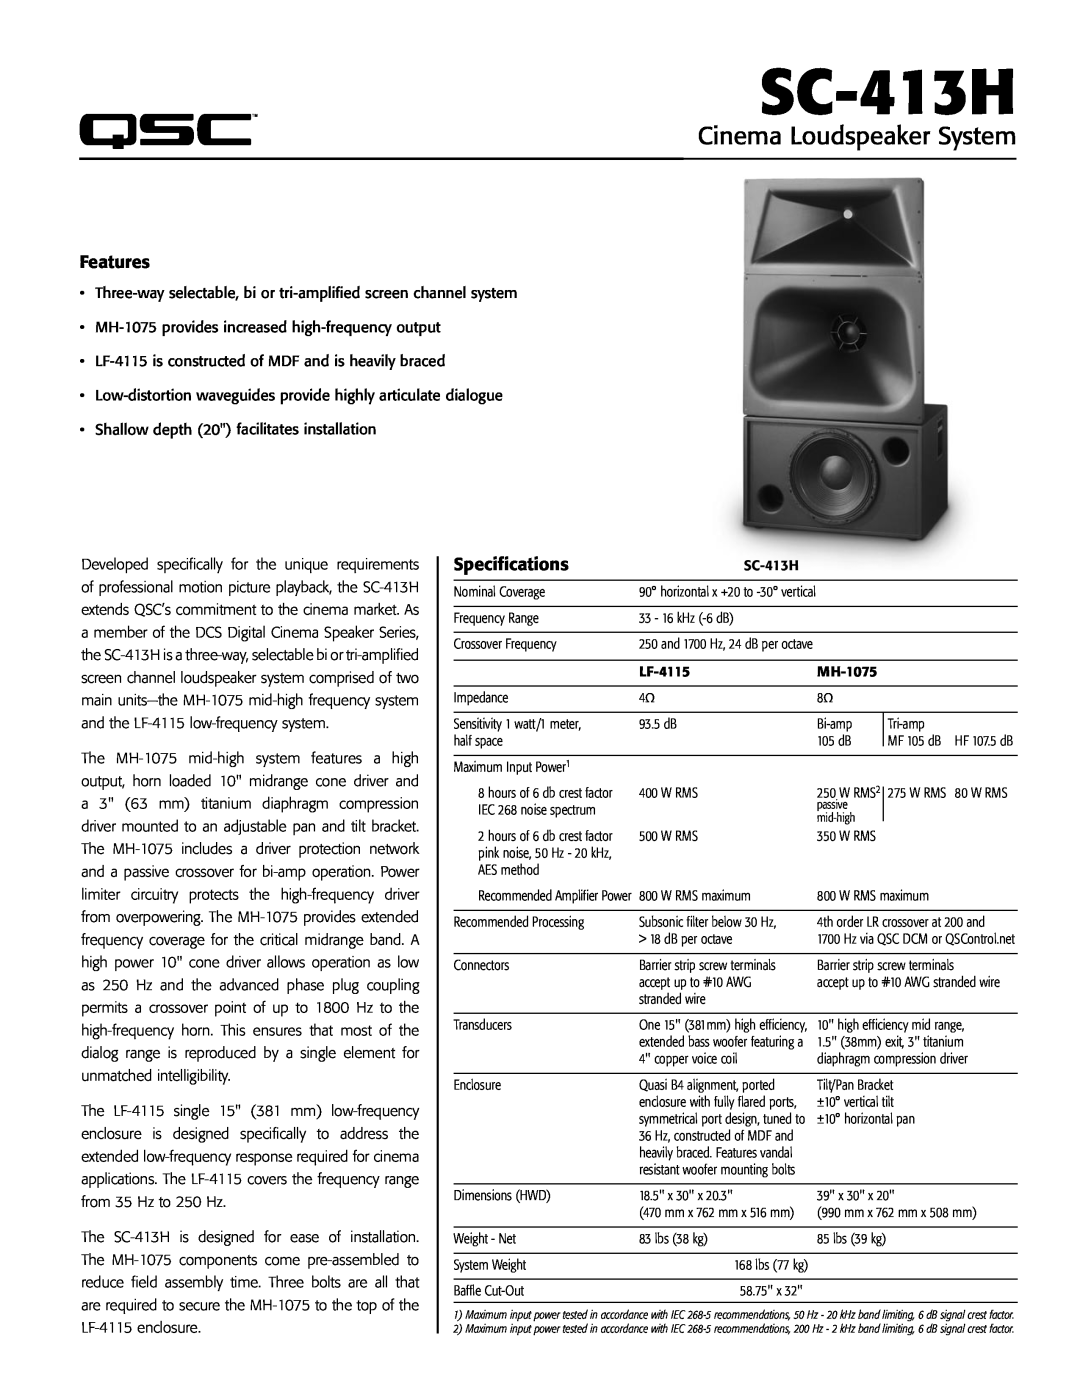 QSC Audio SC-413H specifications Features, Specifications, Cinema Loudspeaker System 